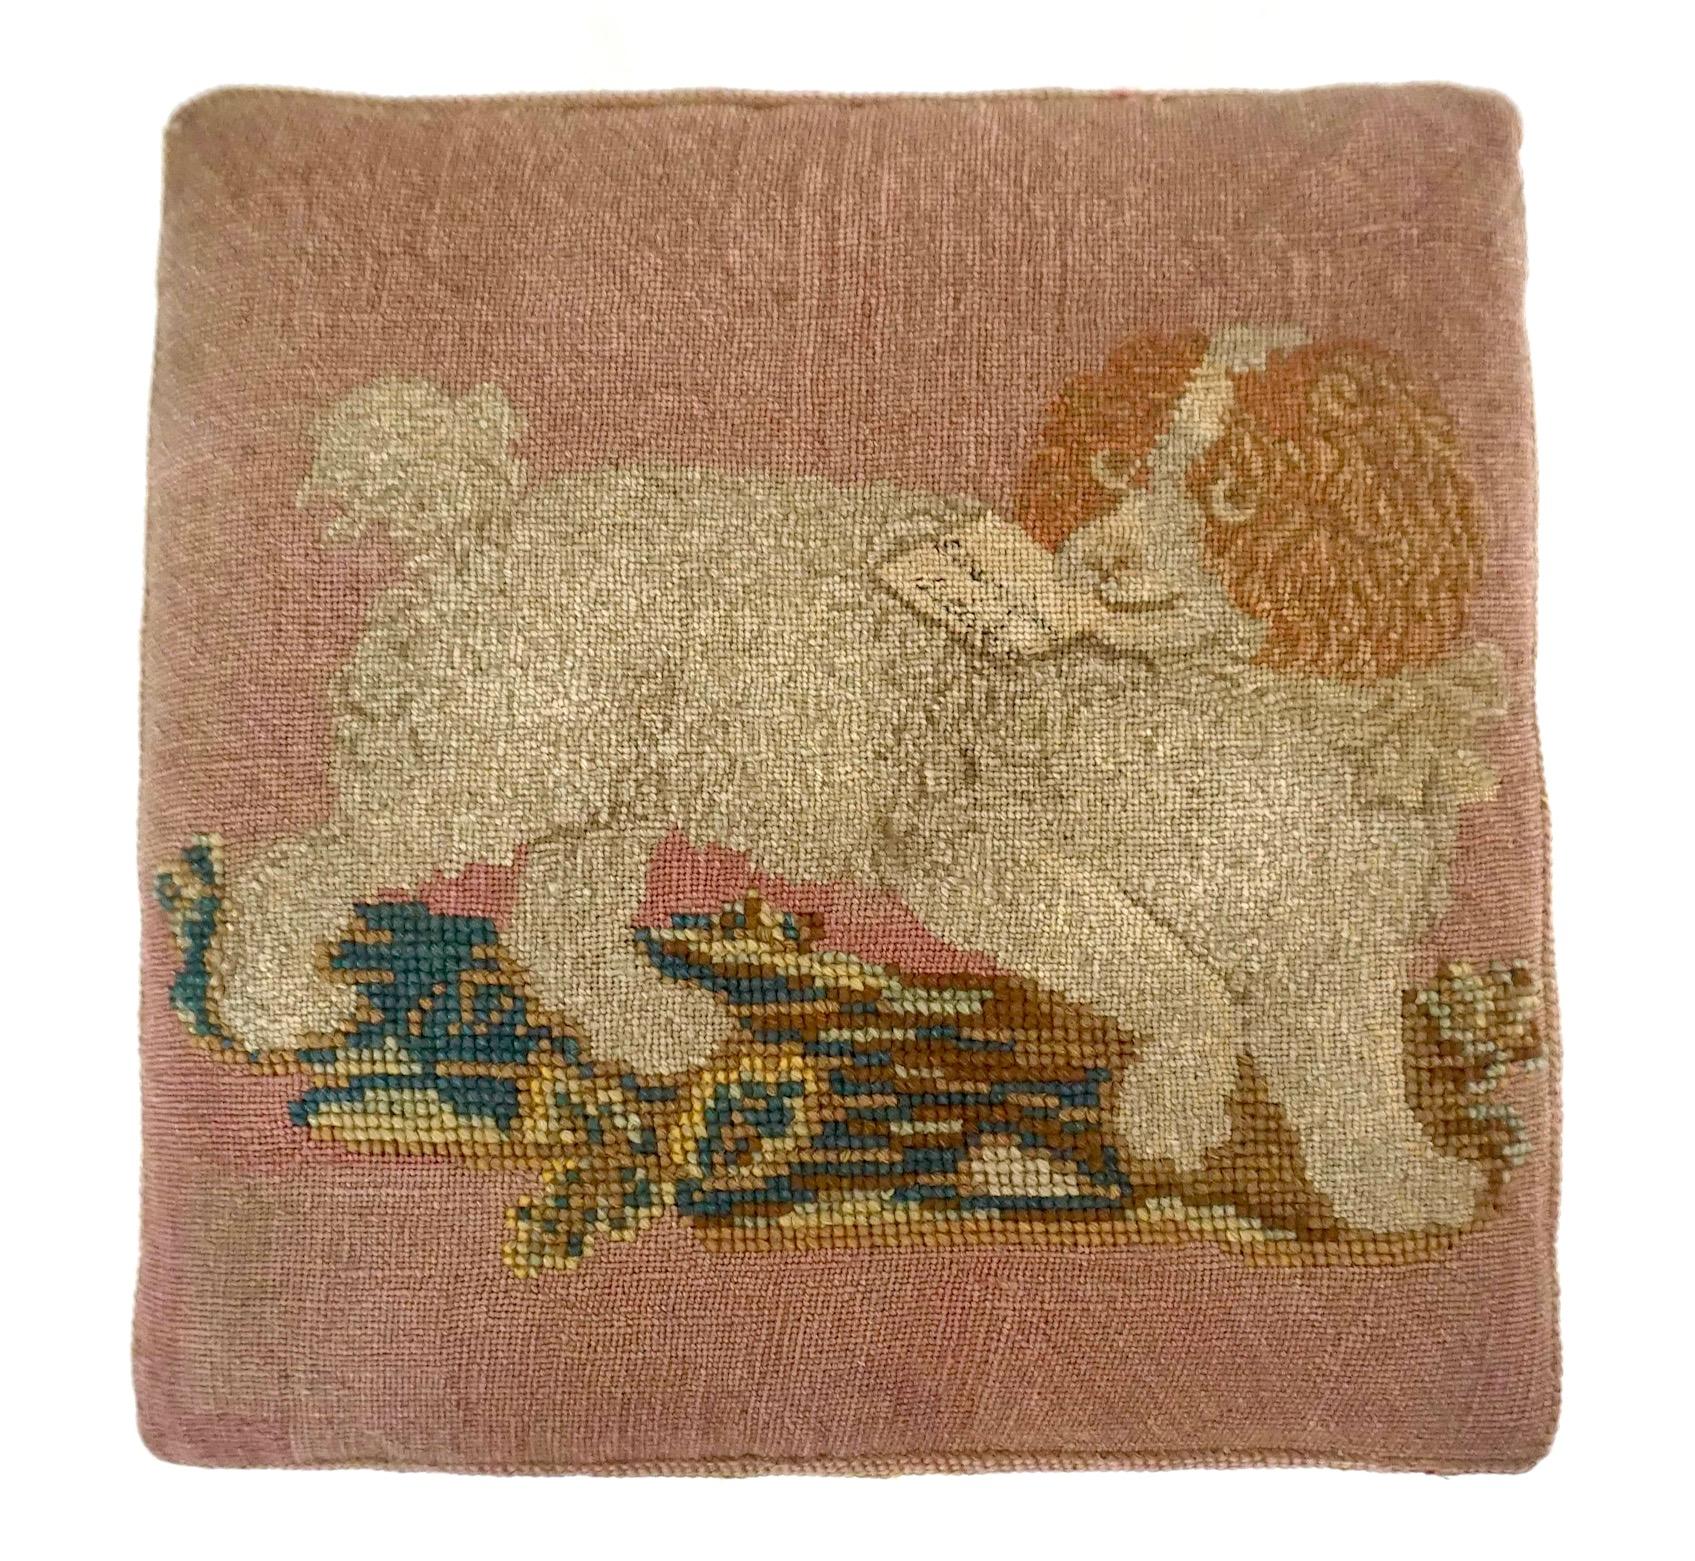 English Regency Mahogany Stool with Original Needlepoint of a Spaniel circa 1820 In Good Condition For Sale In Kinderhook, NY